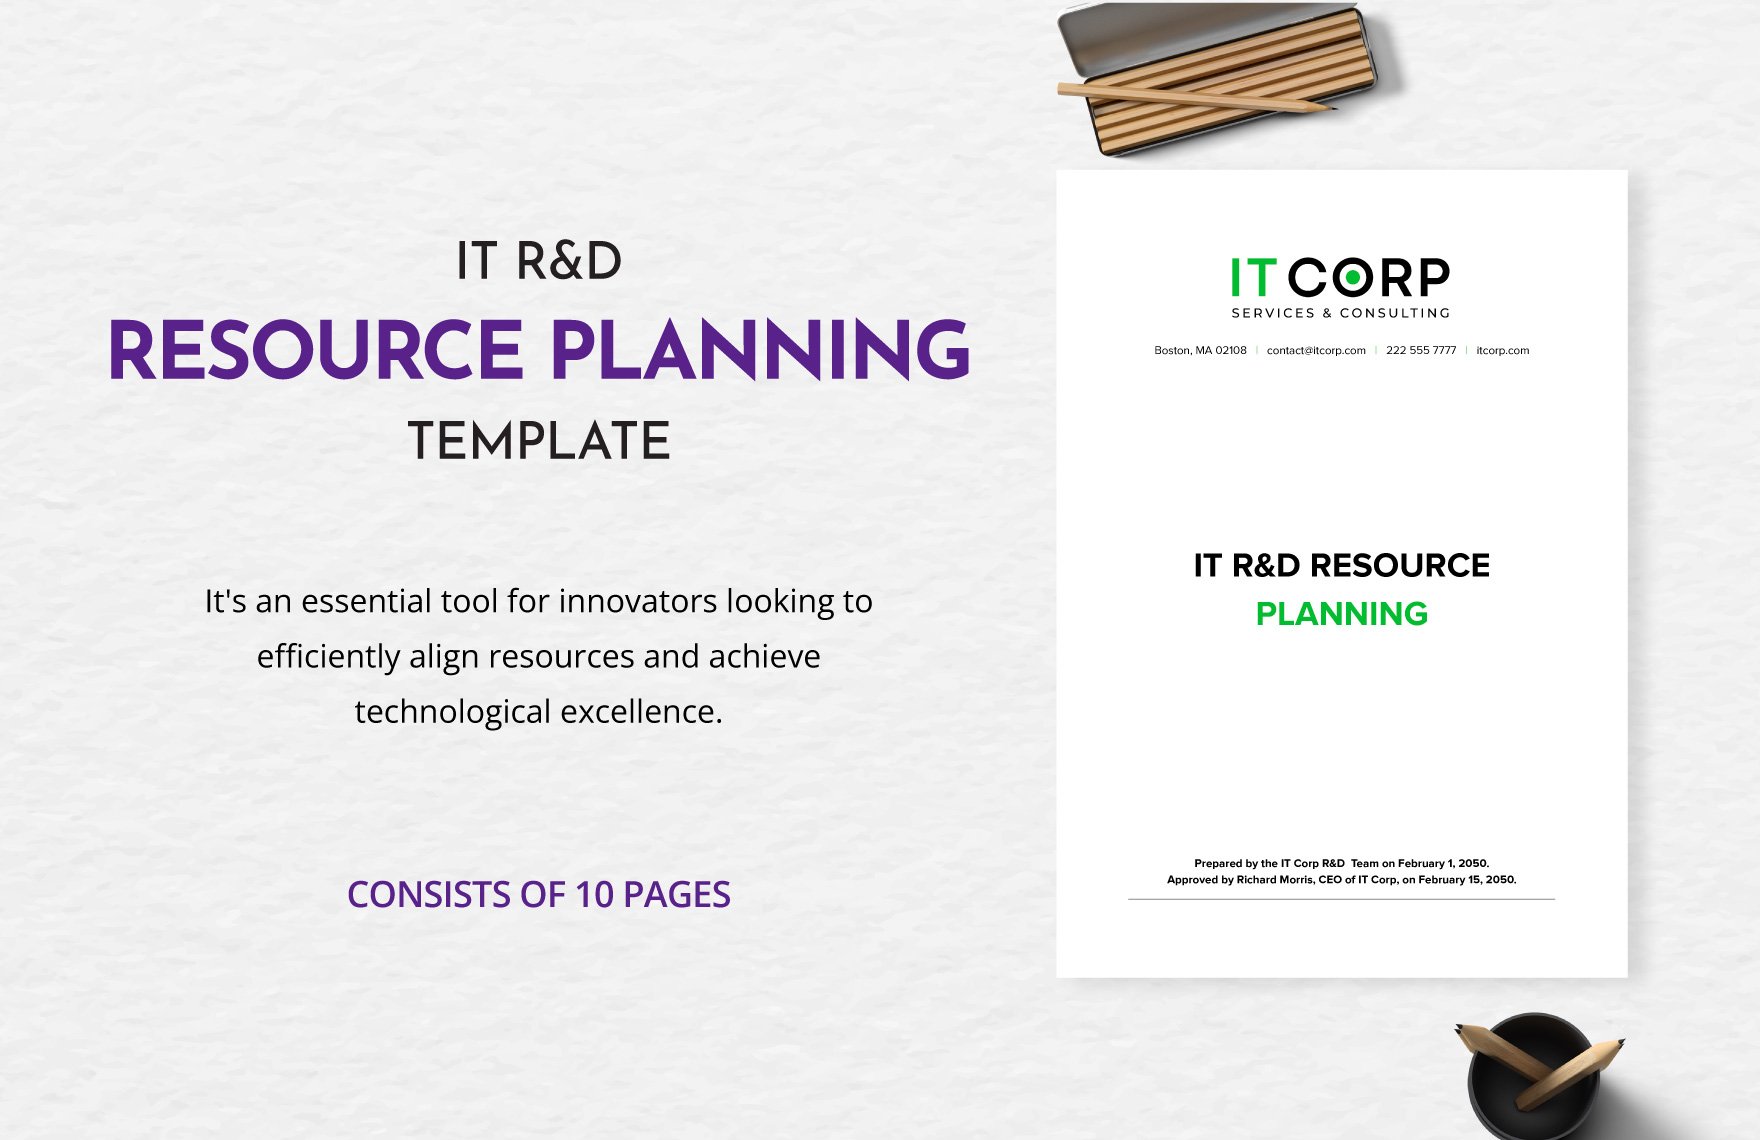 IT R&D Resource Planning Template